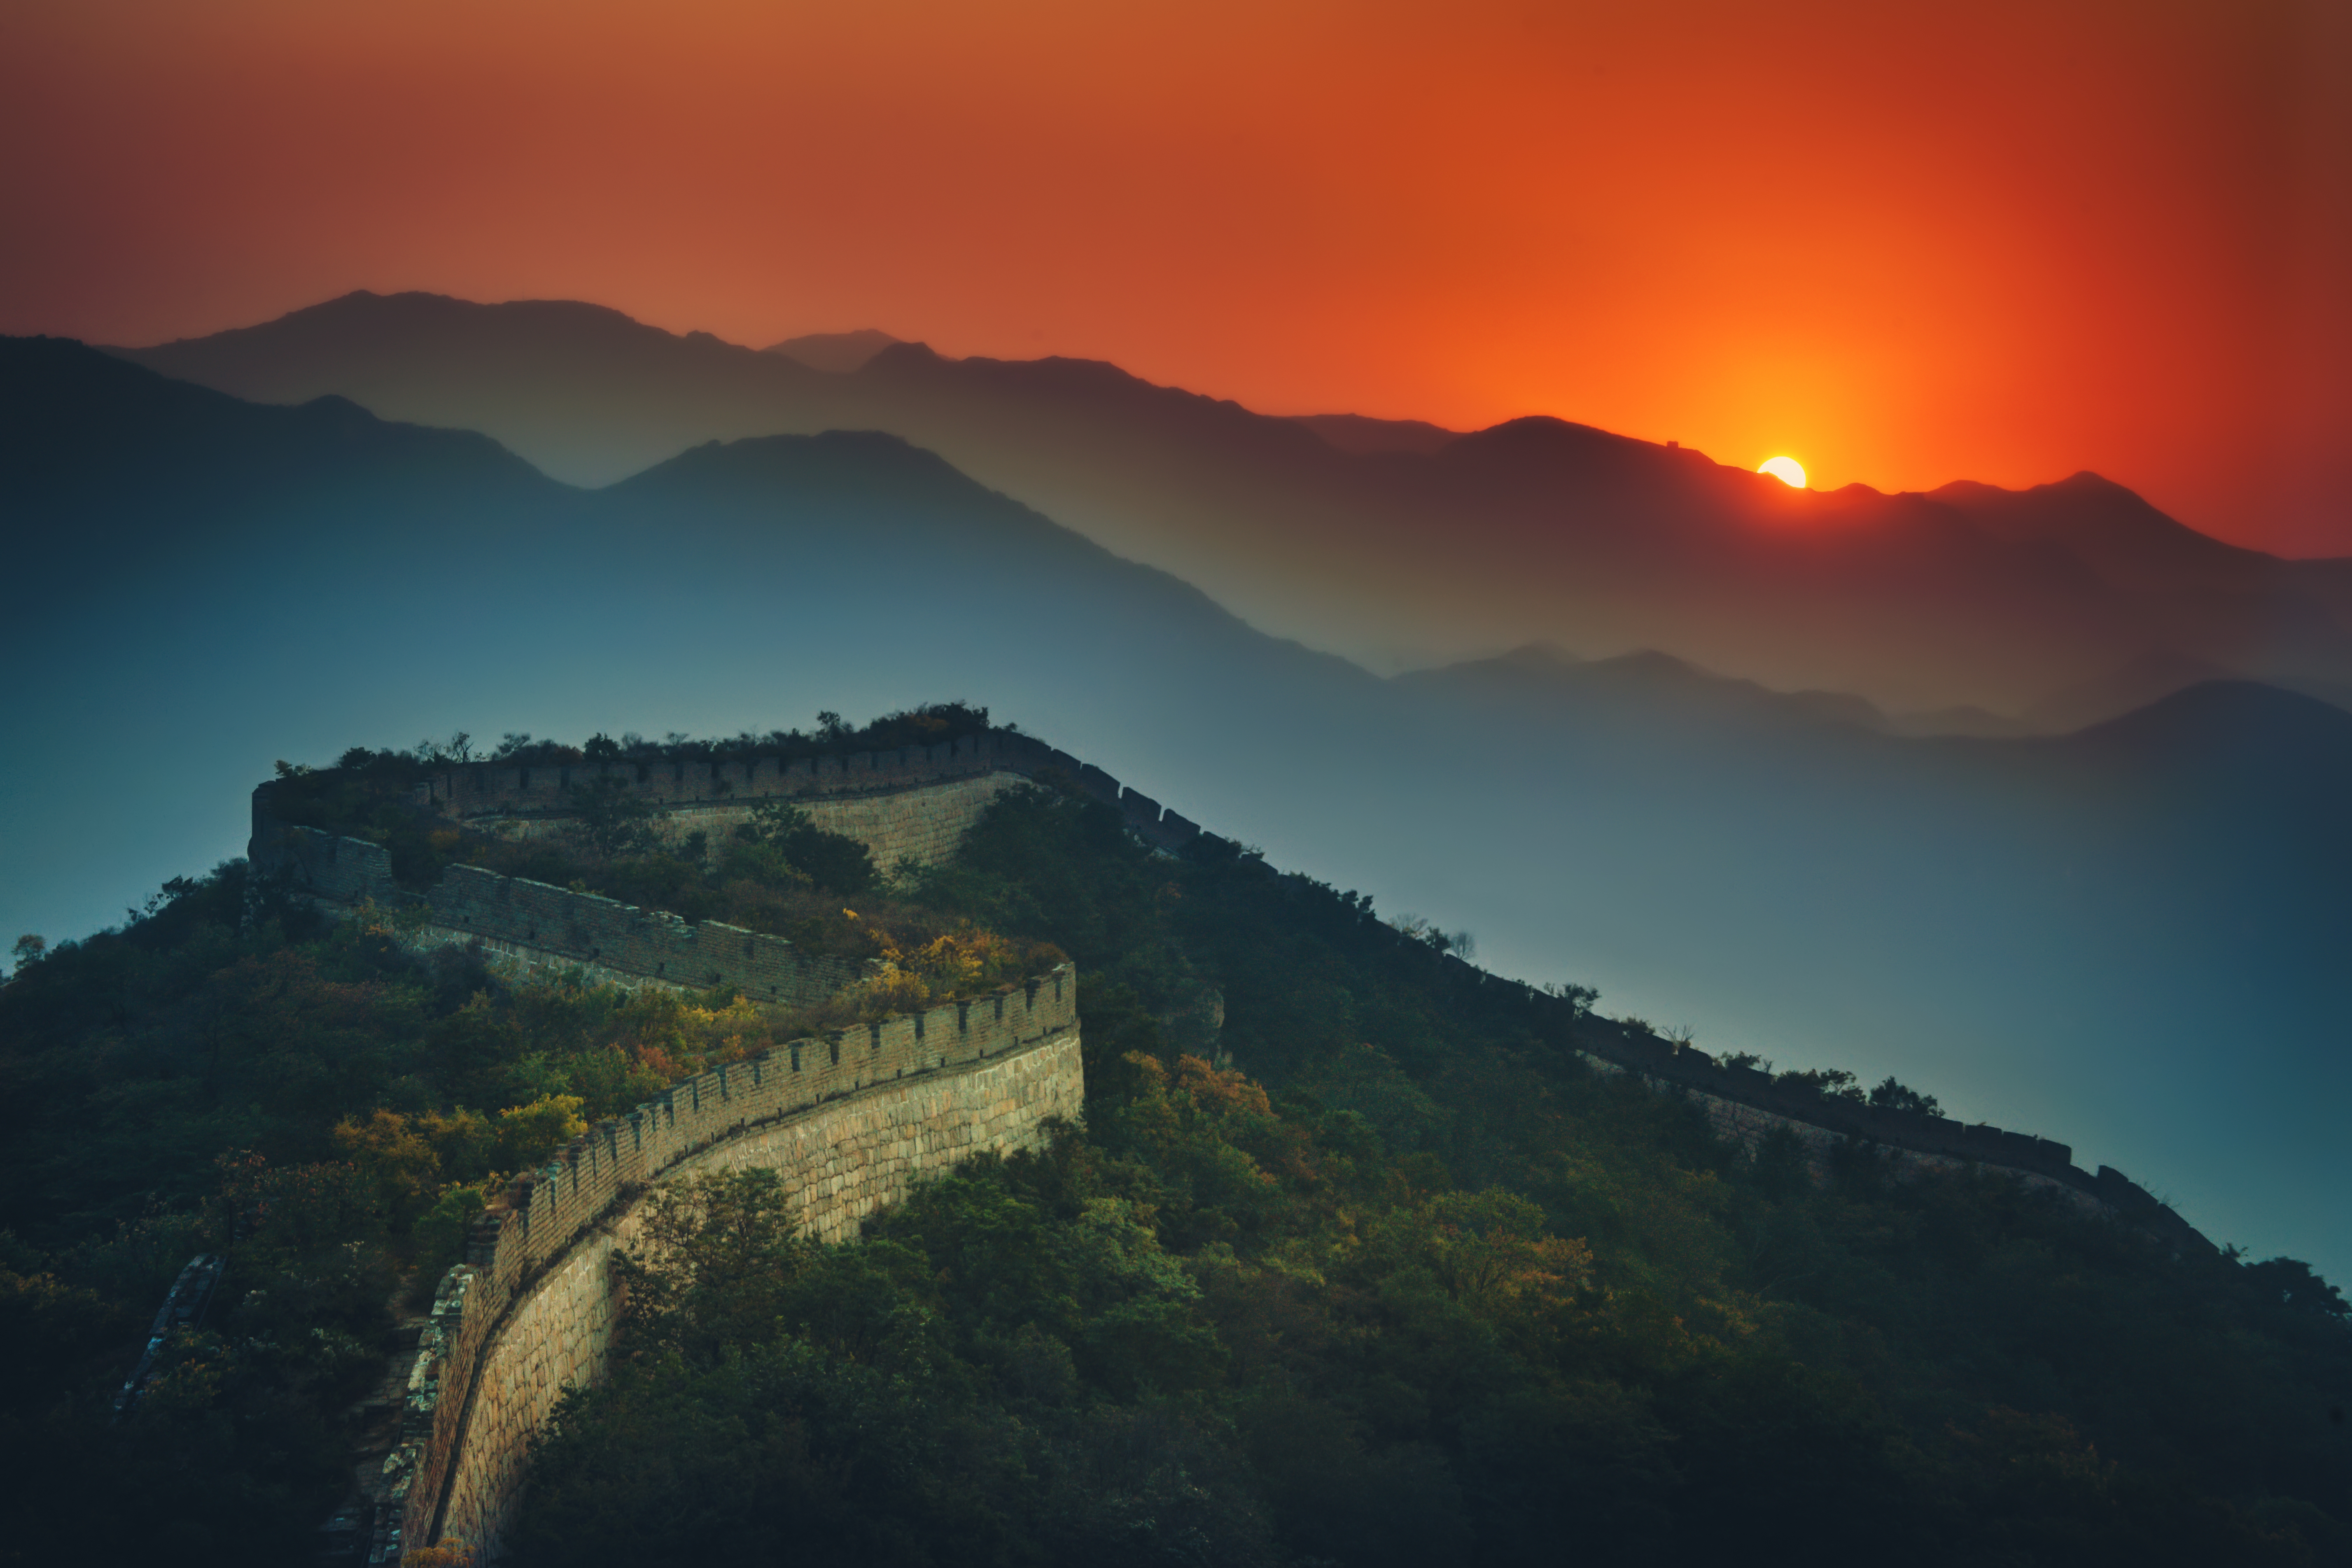 HD wallpaper, Green Trees, Mountains, Aerial View, Great Wall Of China, Beijing, 5K, Sunset, Orange Sky